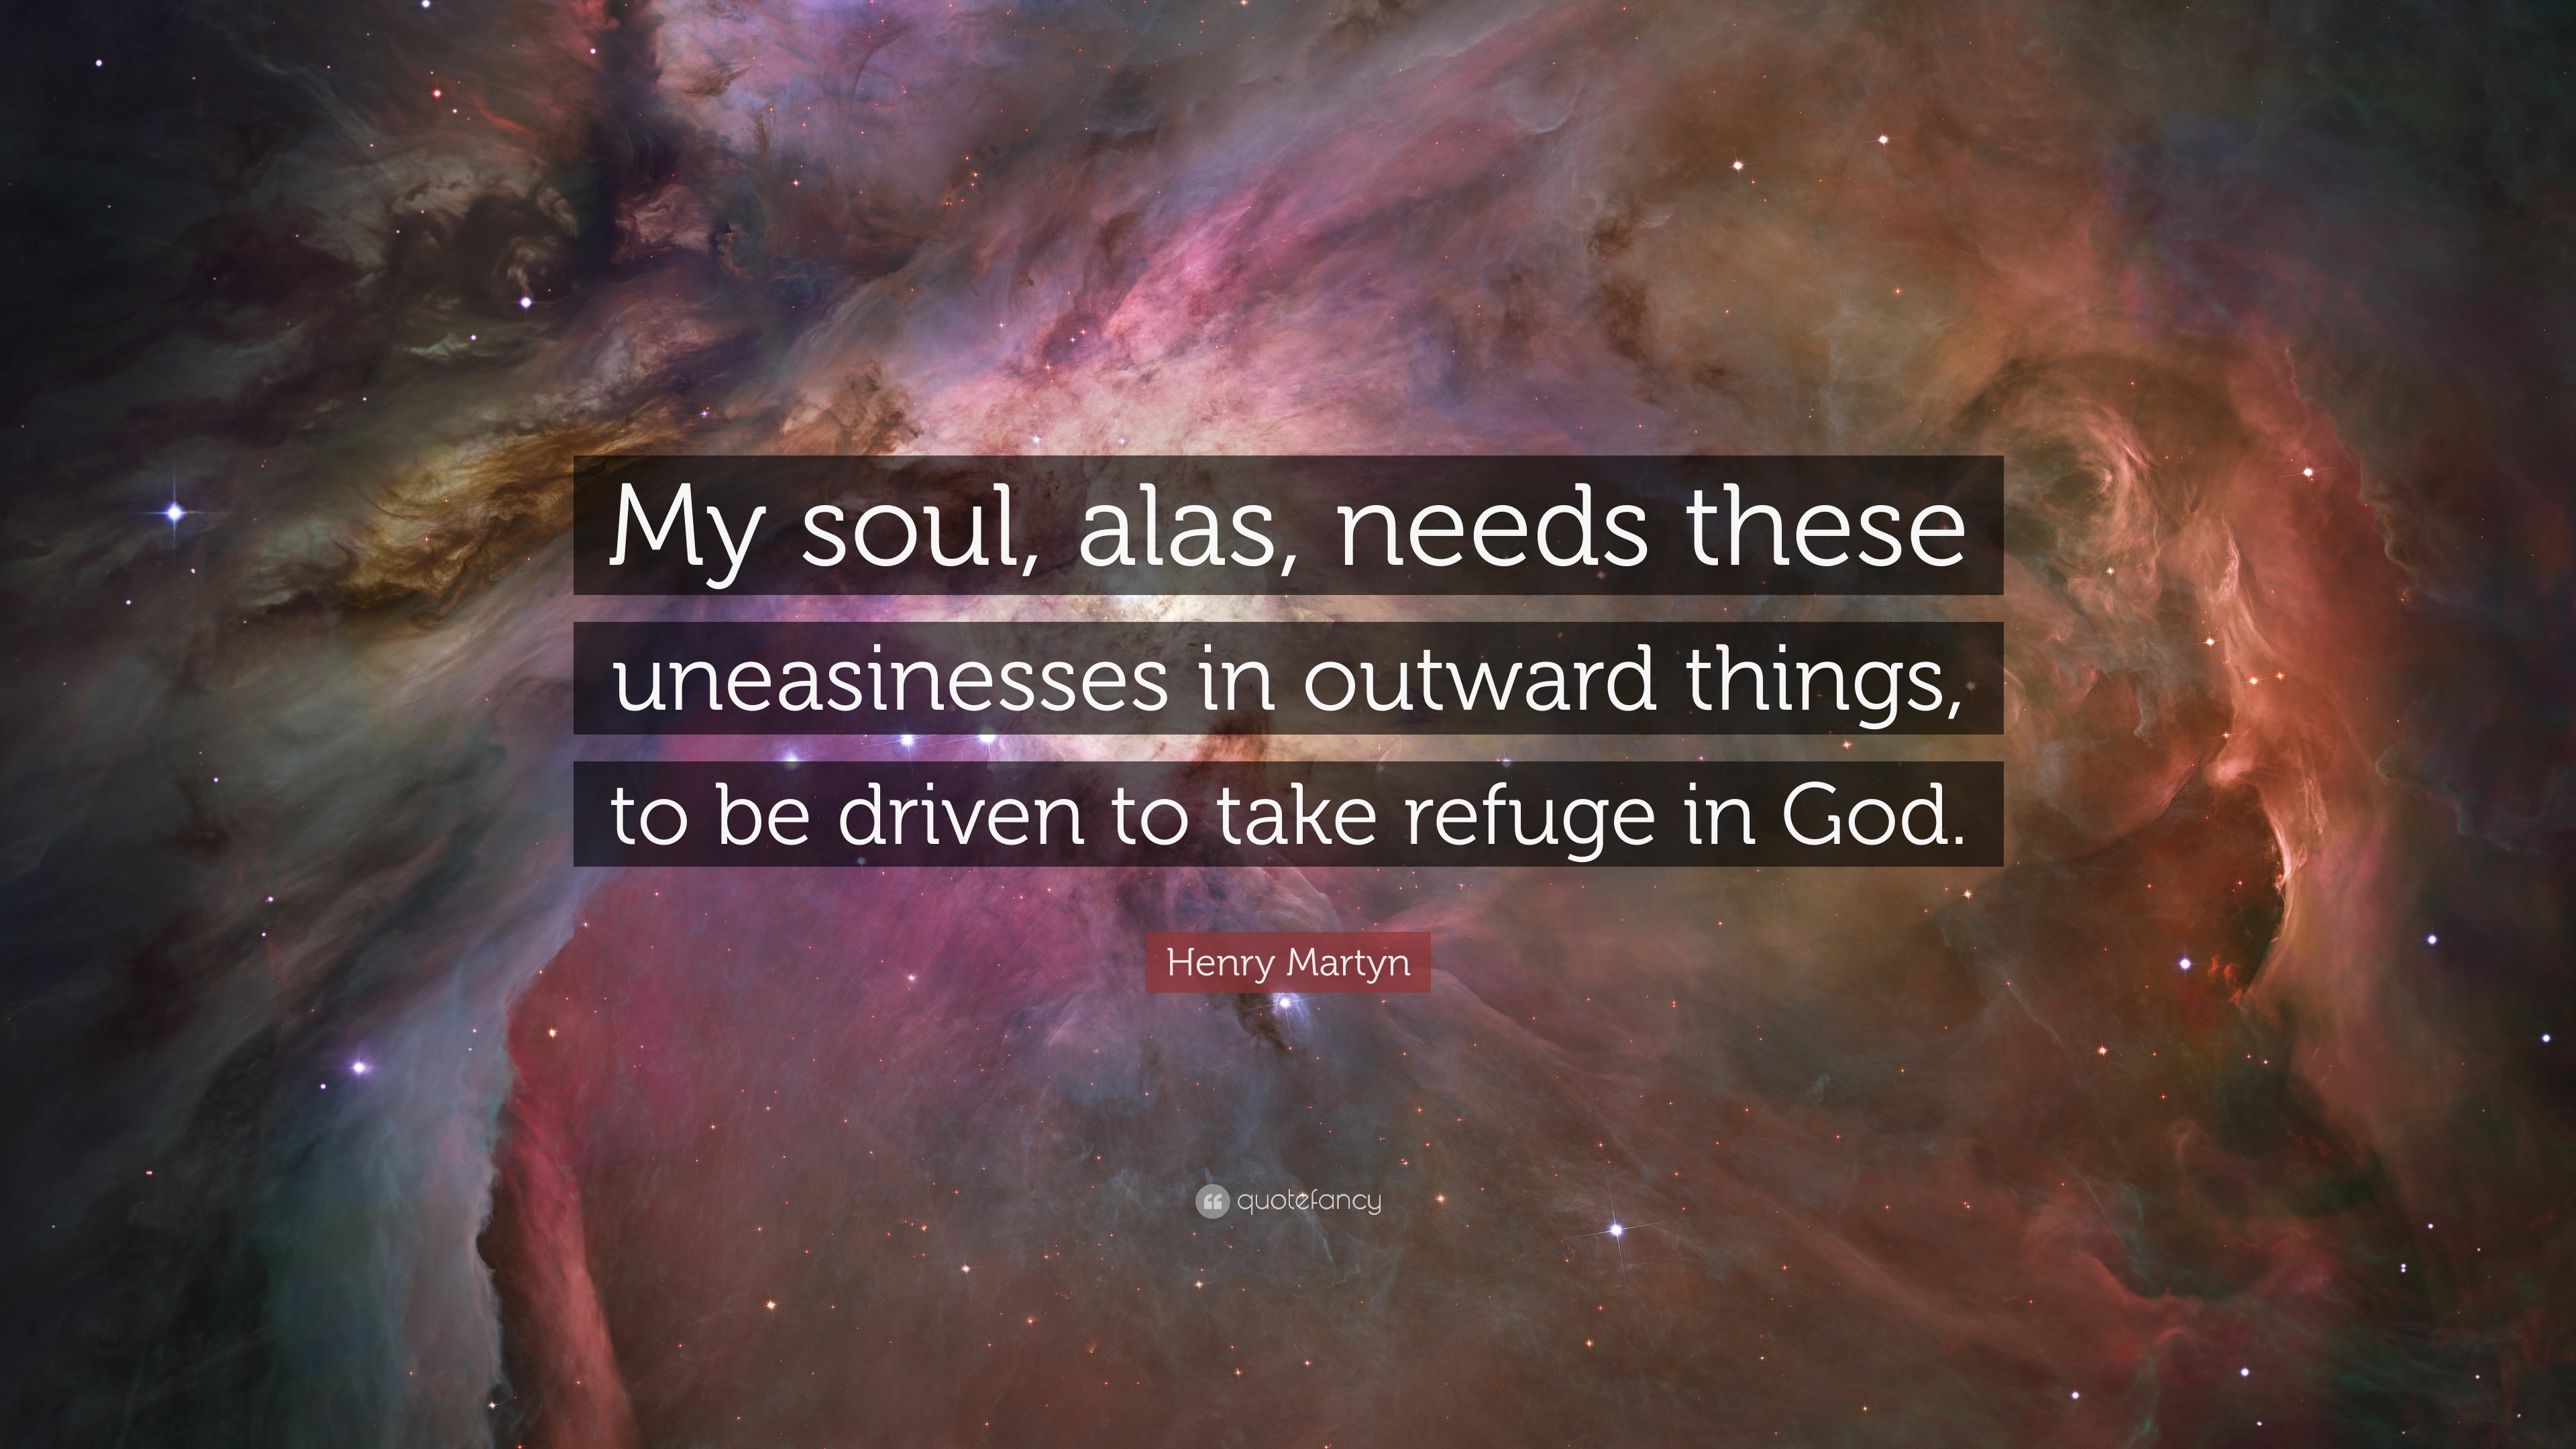 Henry Martyn Quote: “My soul, alas, needs these uneasinesses in